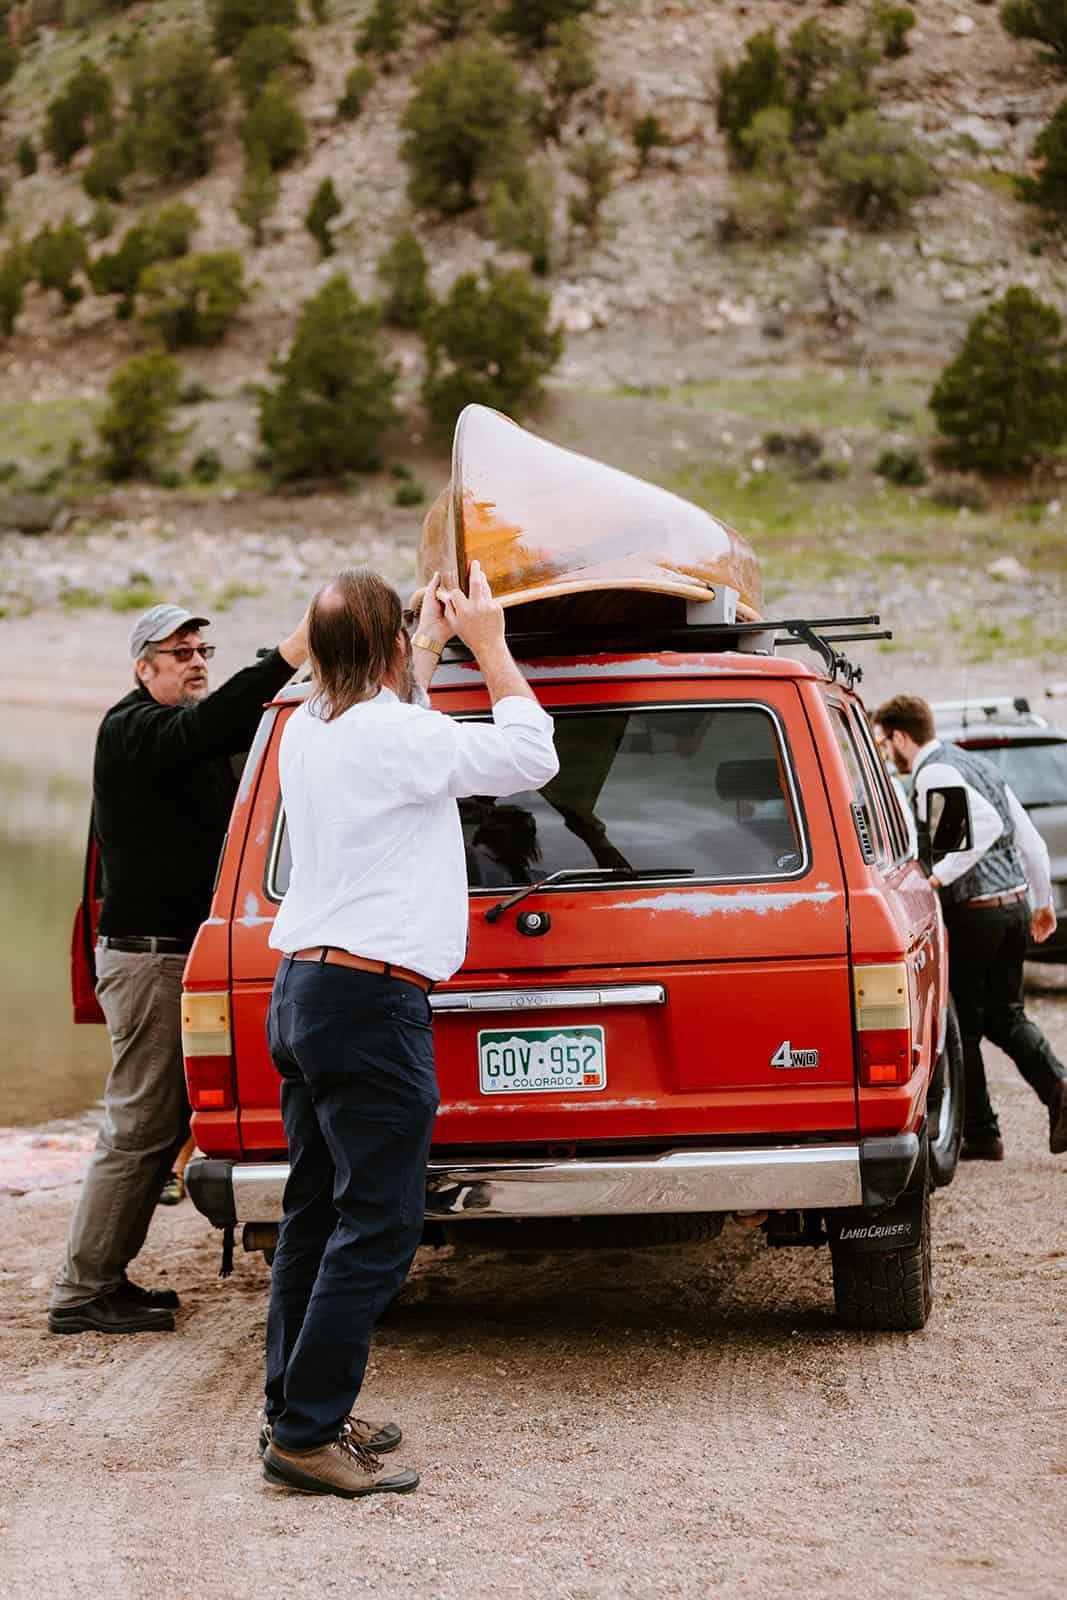 A family helps unload a wood canoe off of a red Toyota Land Cruiser